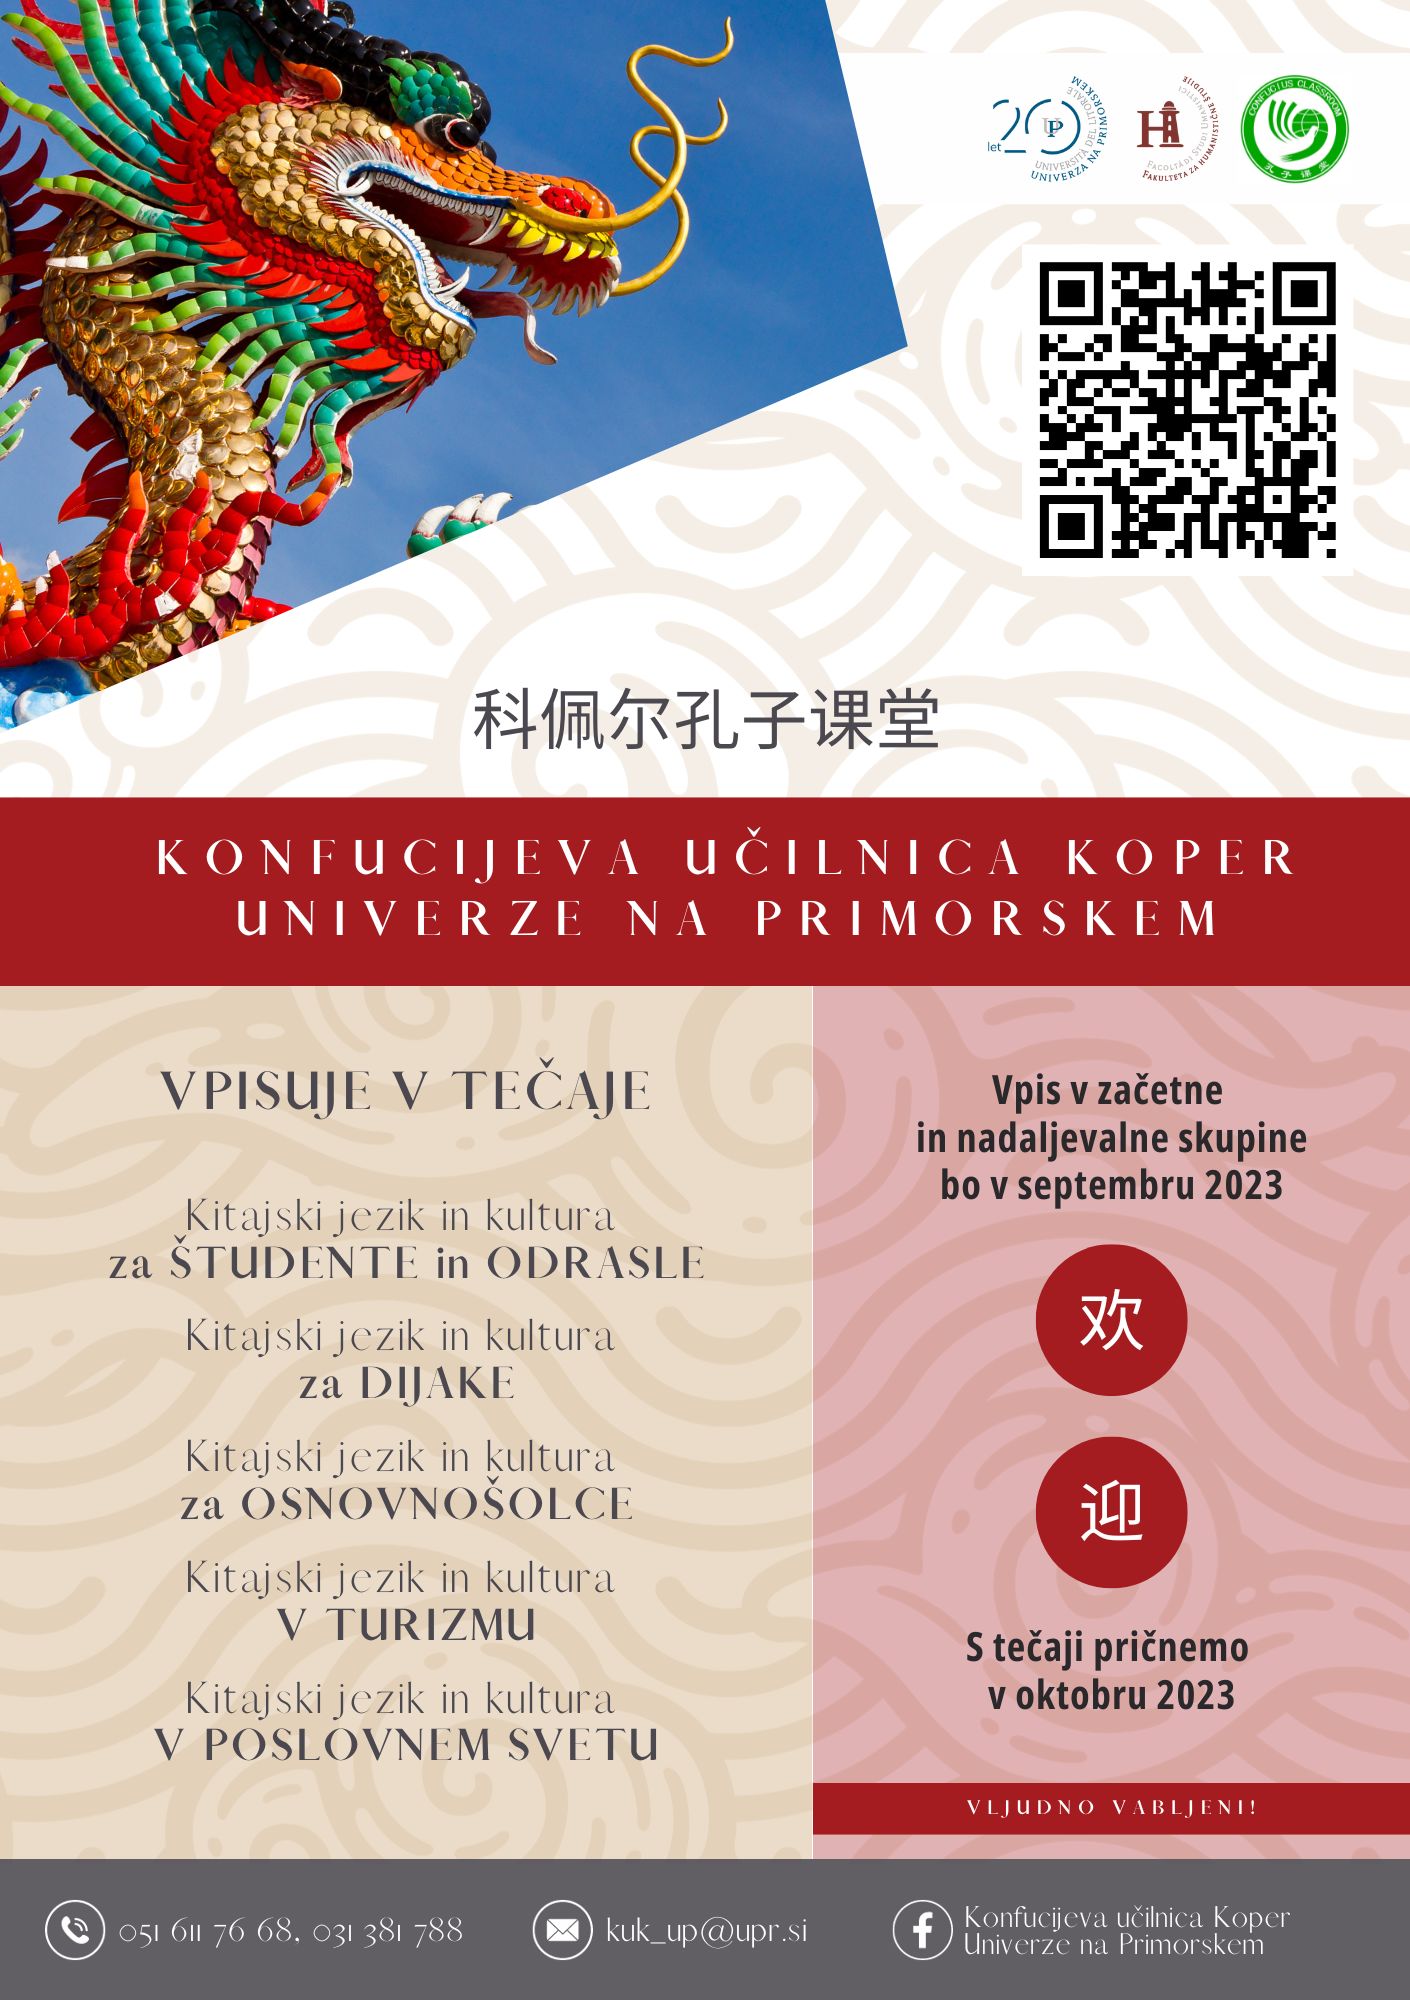 Open Enrollment for Chinese Language and Culture Course